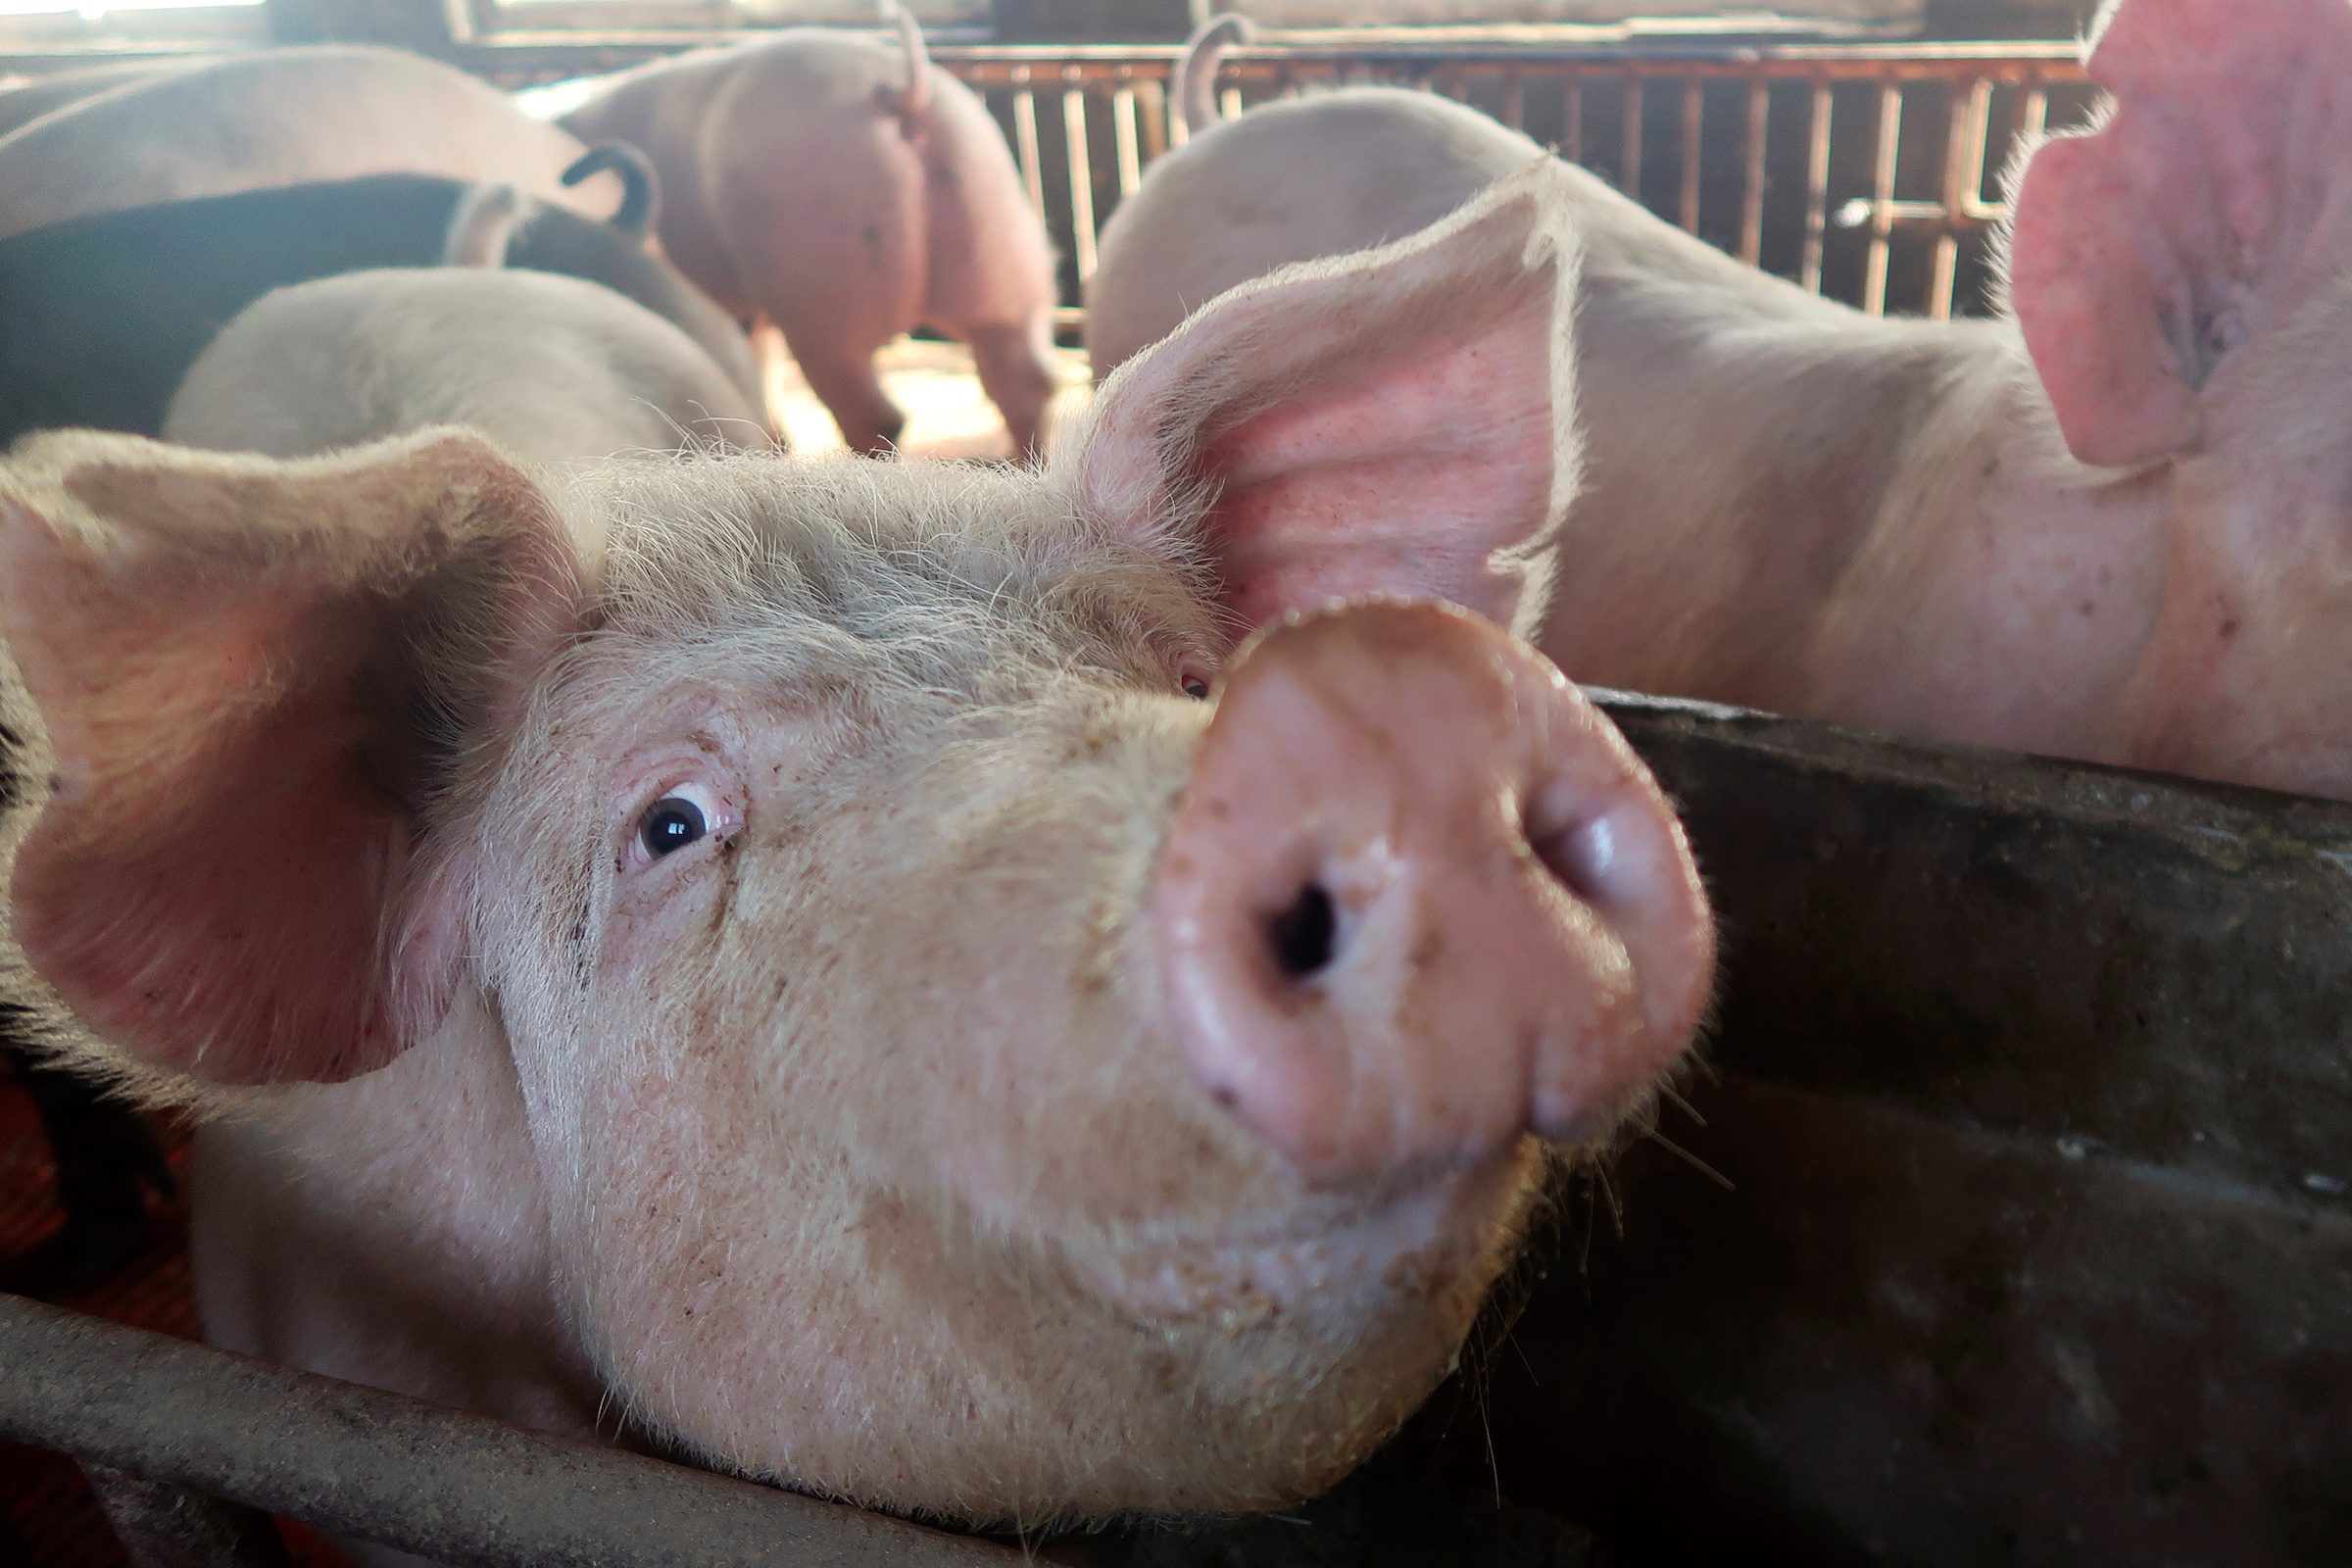 Organ decay halted, cell function restored in pigs after death – study